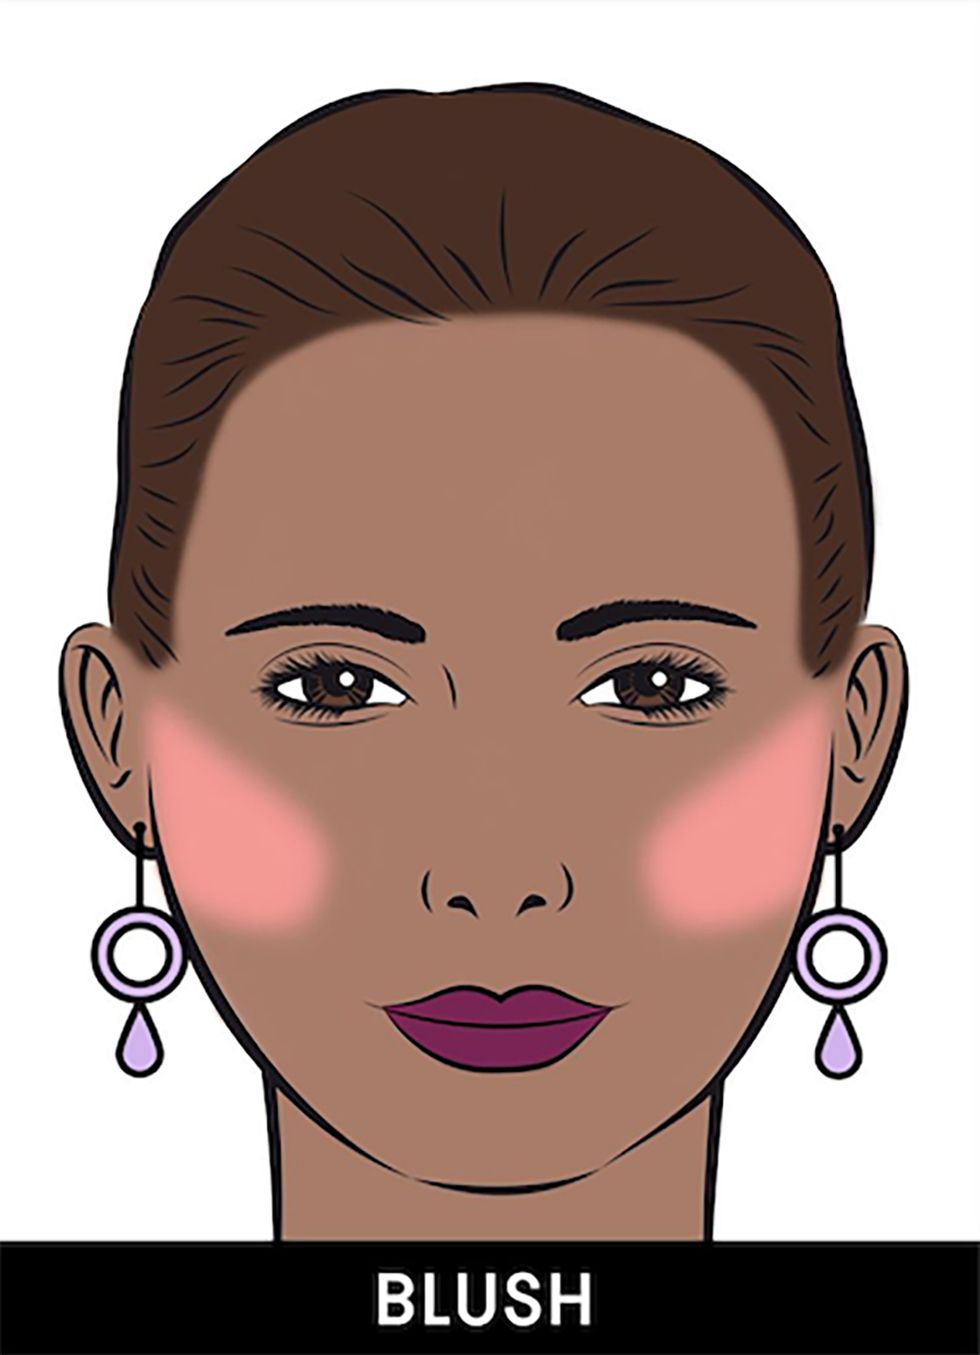 How to Contour Your Face in 4 Steps - Contour Makeup & Highlight Tips